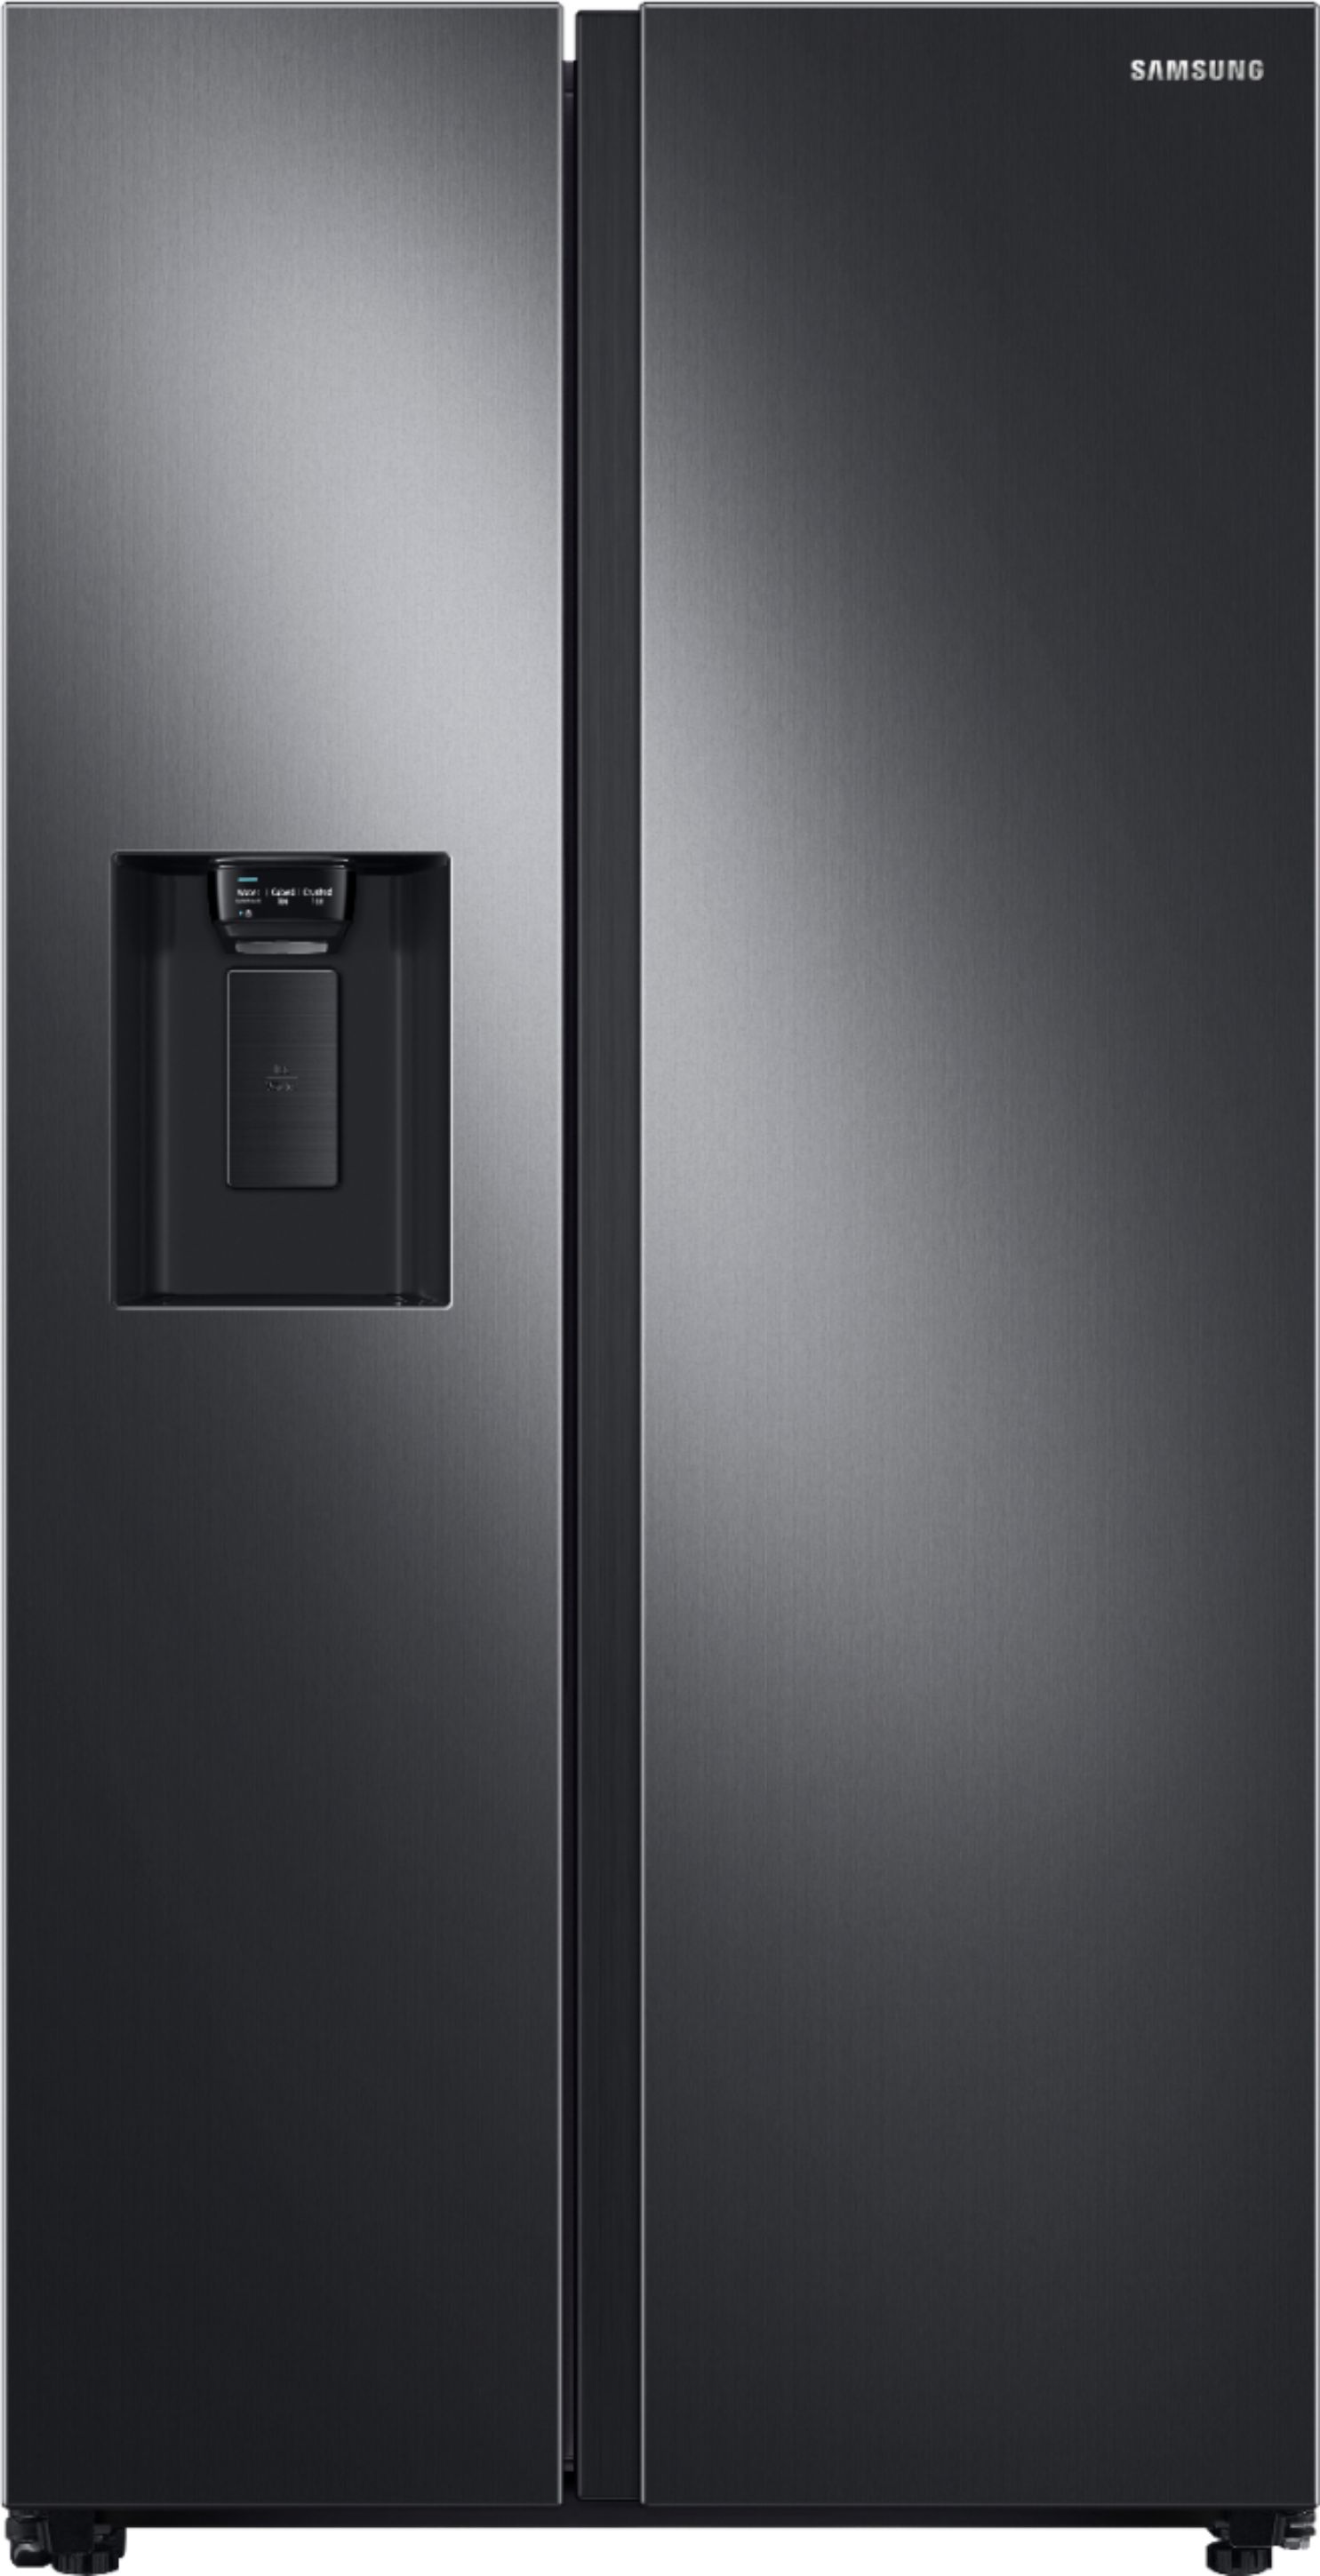 Samsung – 22 Cu. Ft. Side-by-Side Counter-Depth Refrigerator – Black stainless steel